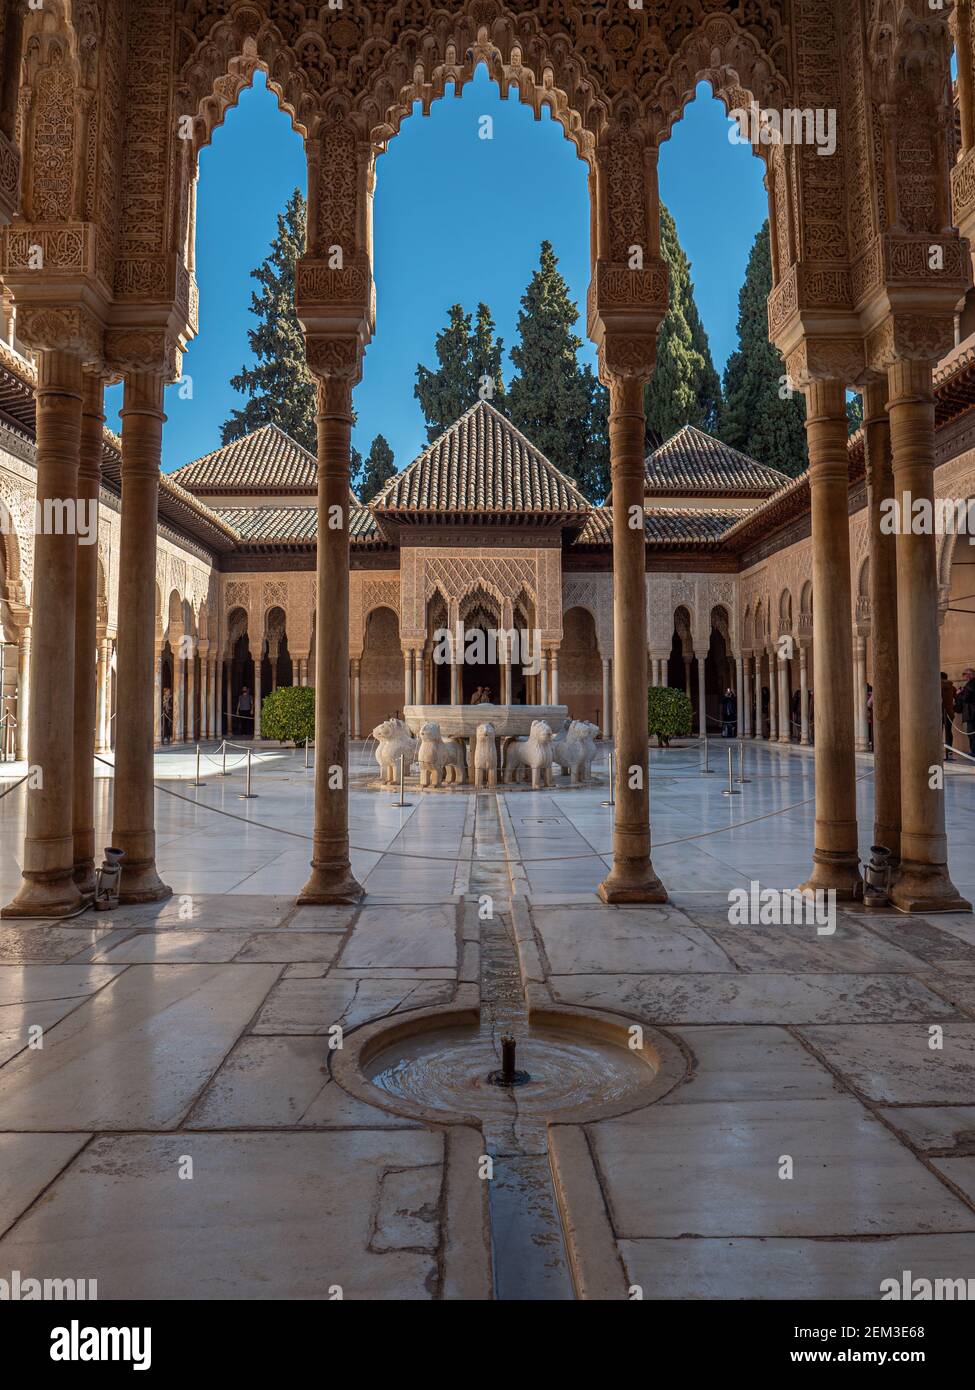 The Court of The Lions at The Alhambra, Granada, Spain. Stock Photo